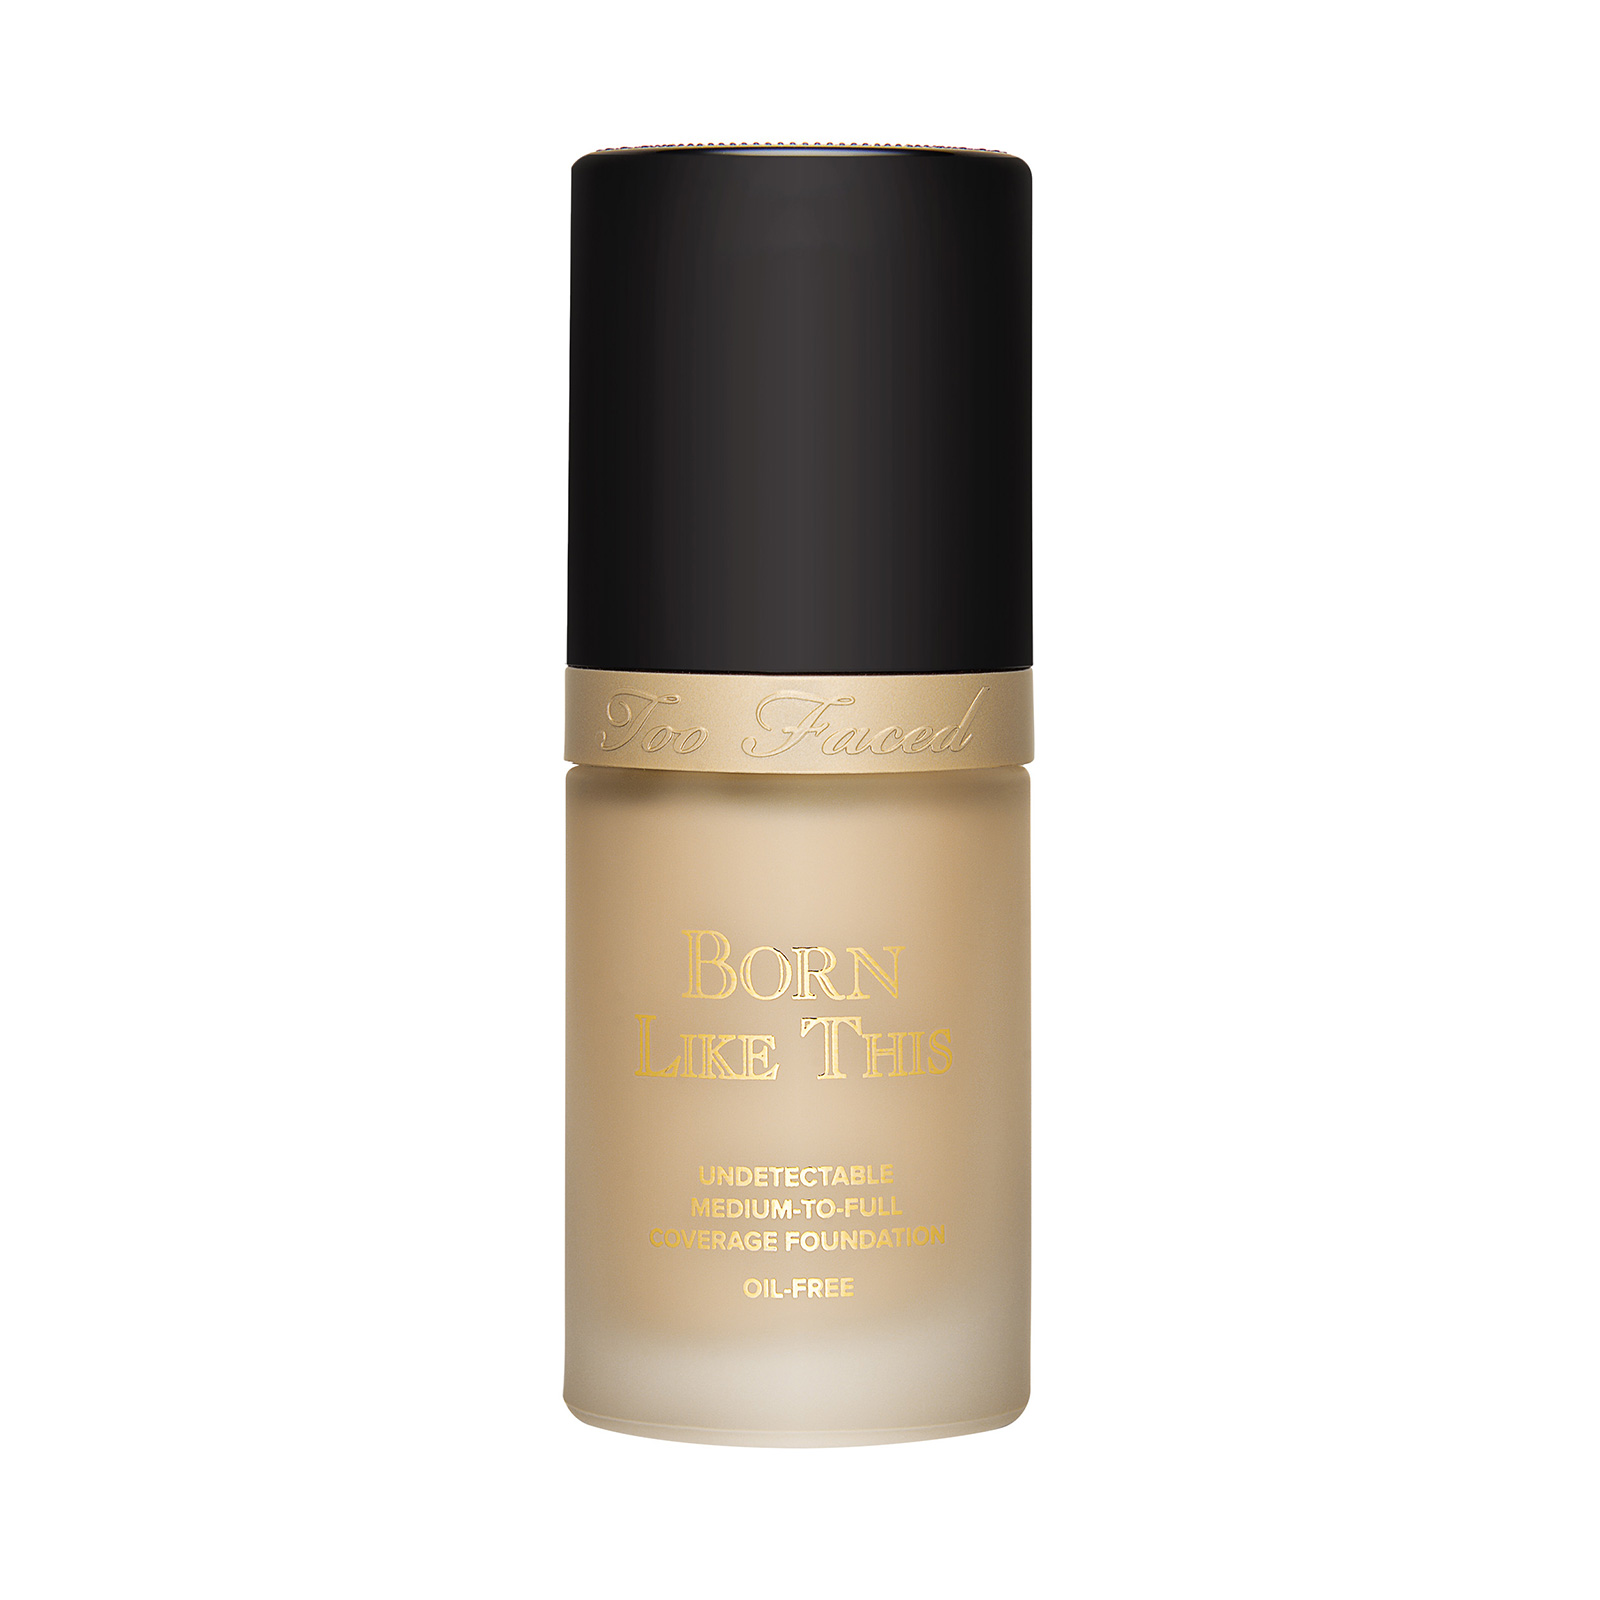 Born Like This Undetectable Medium-To-Full Coverage Foundation